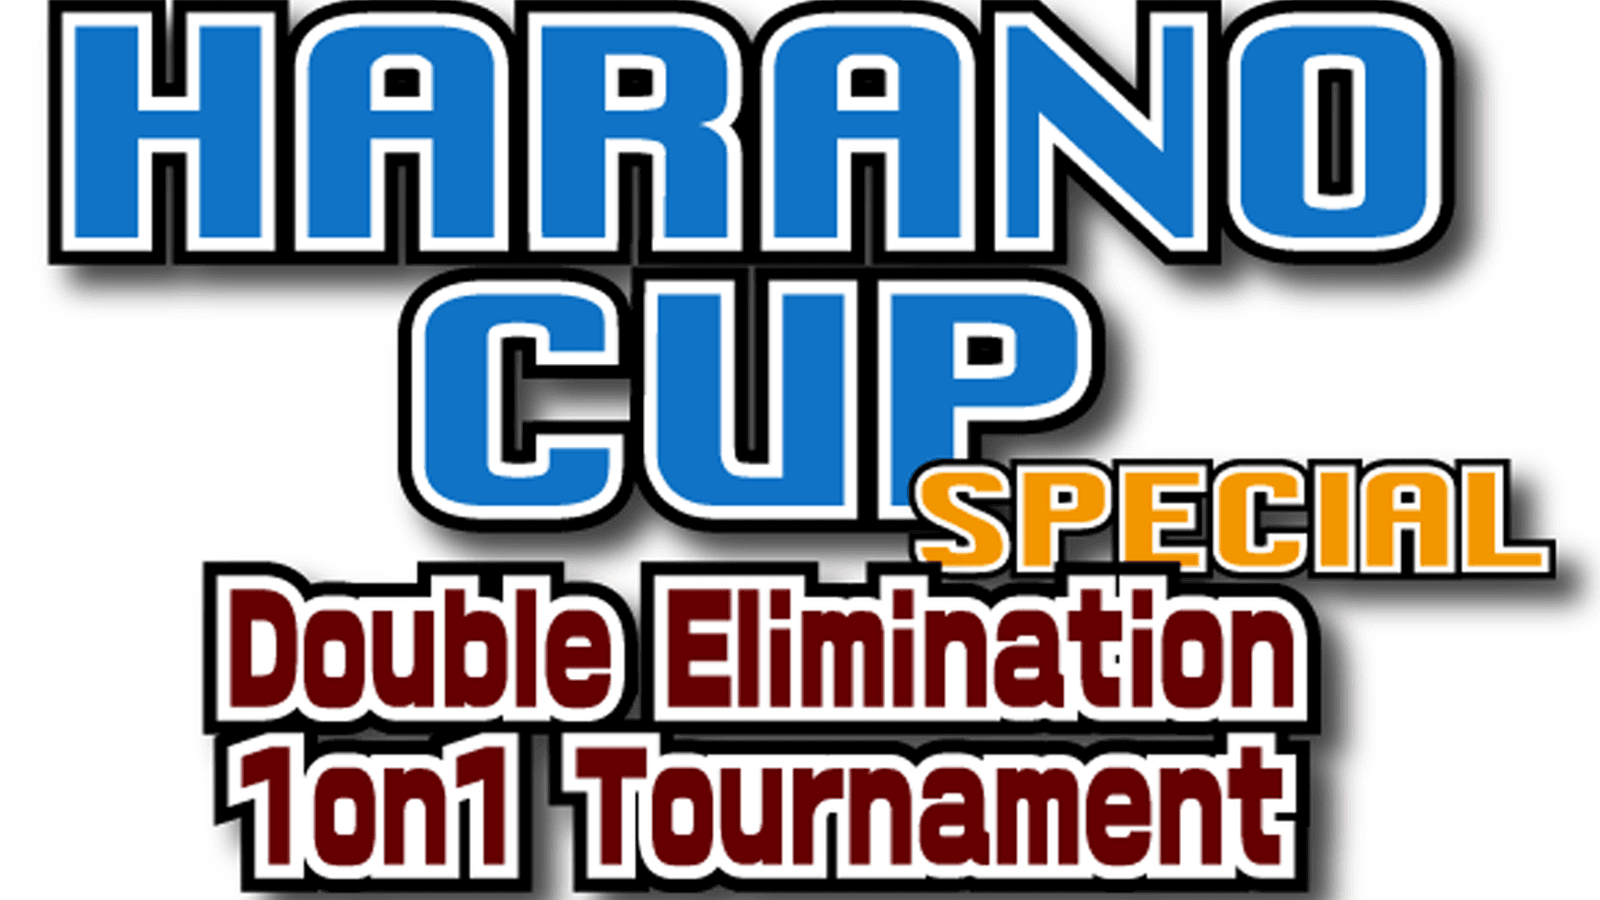 HARANO CUP SPECIAL feature image